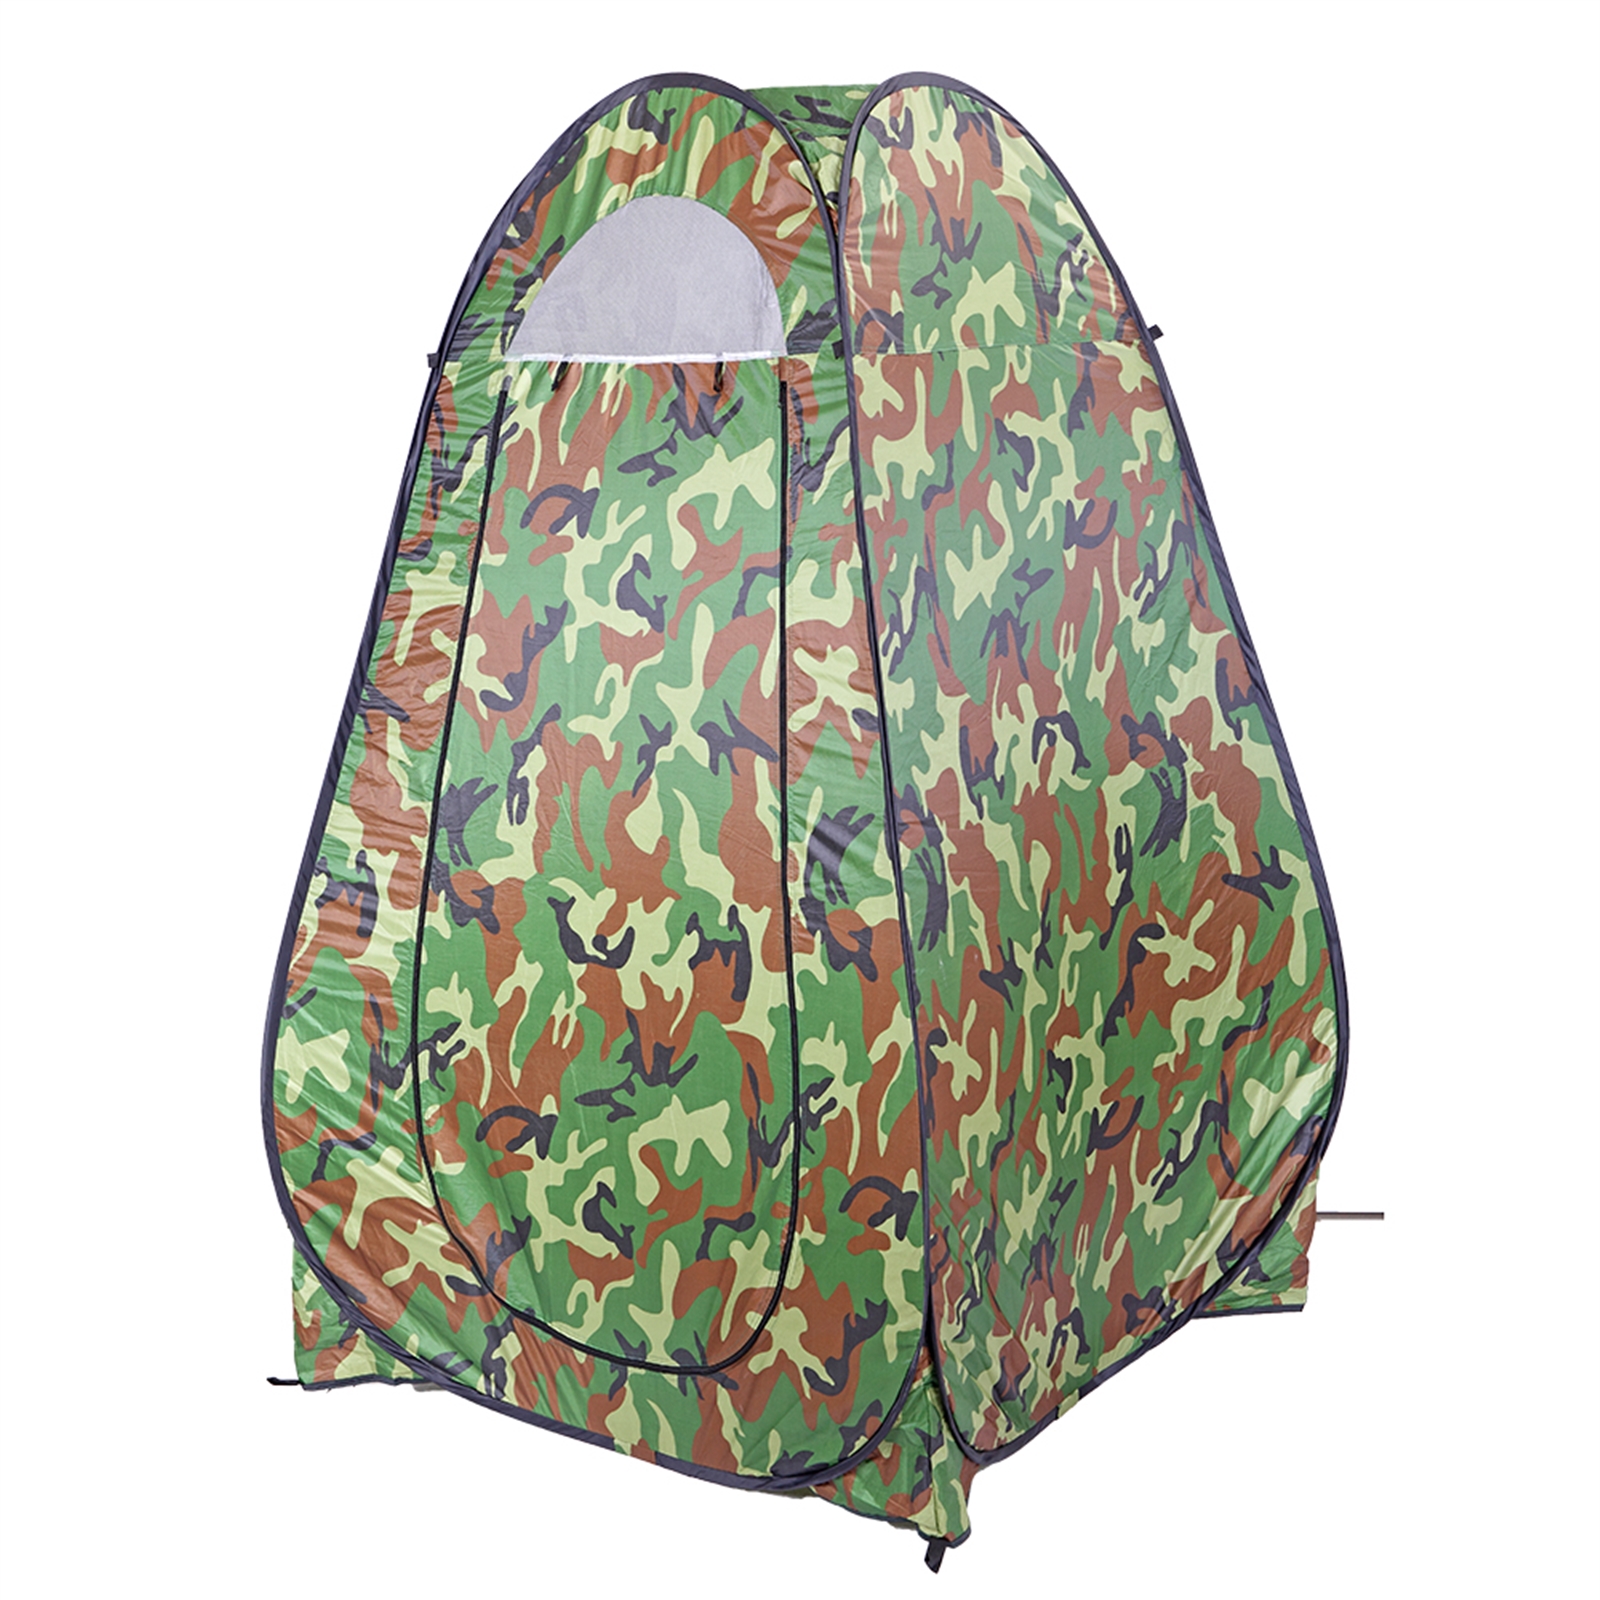 Portable Privacy Tent, Pop-Up Dressing Room Camping Shower Tent for Camping Picnic, Camouflage - image 5 of 7